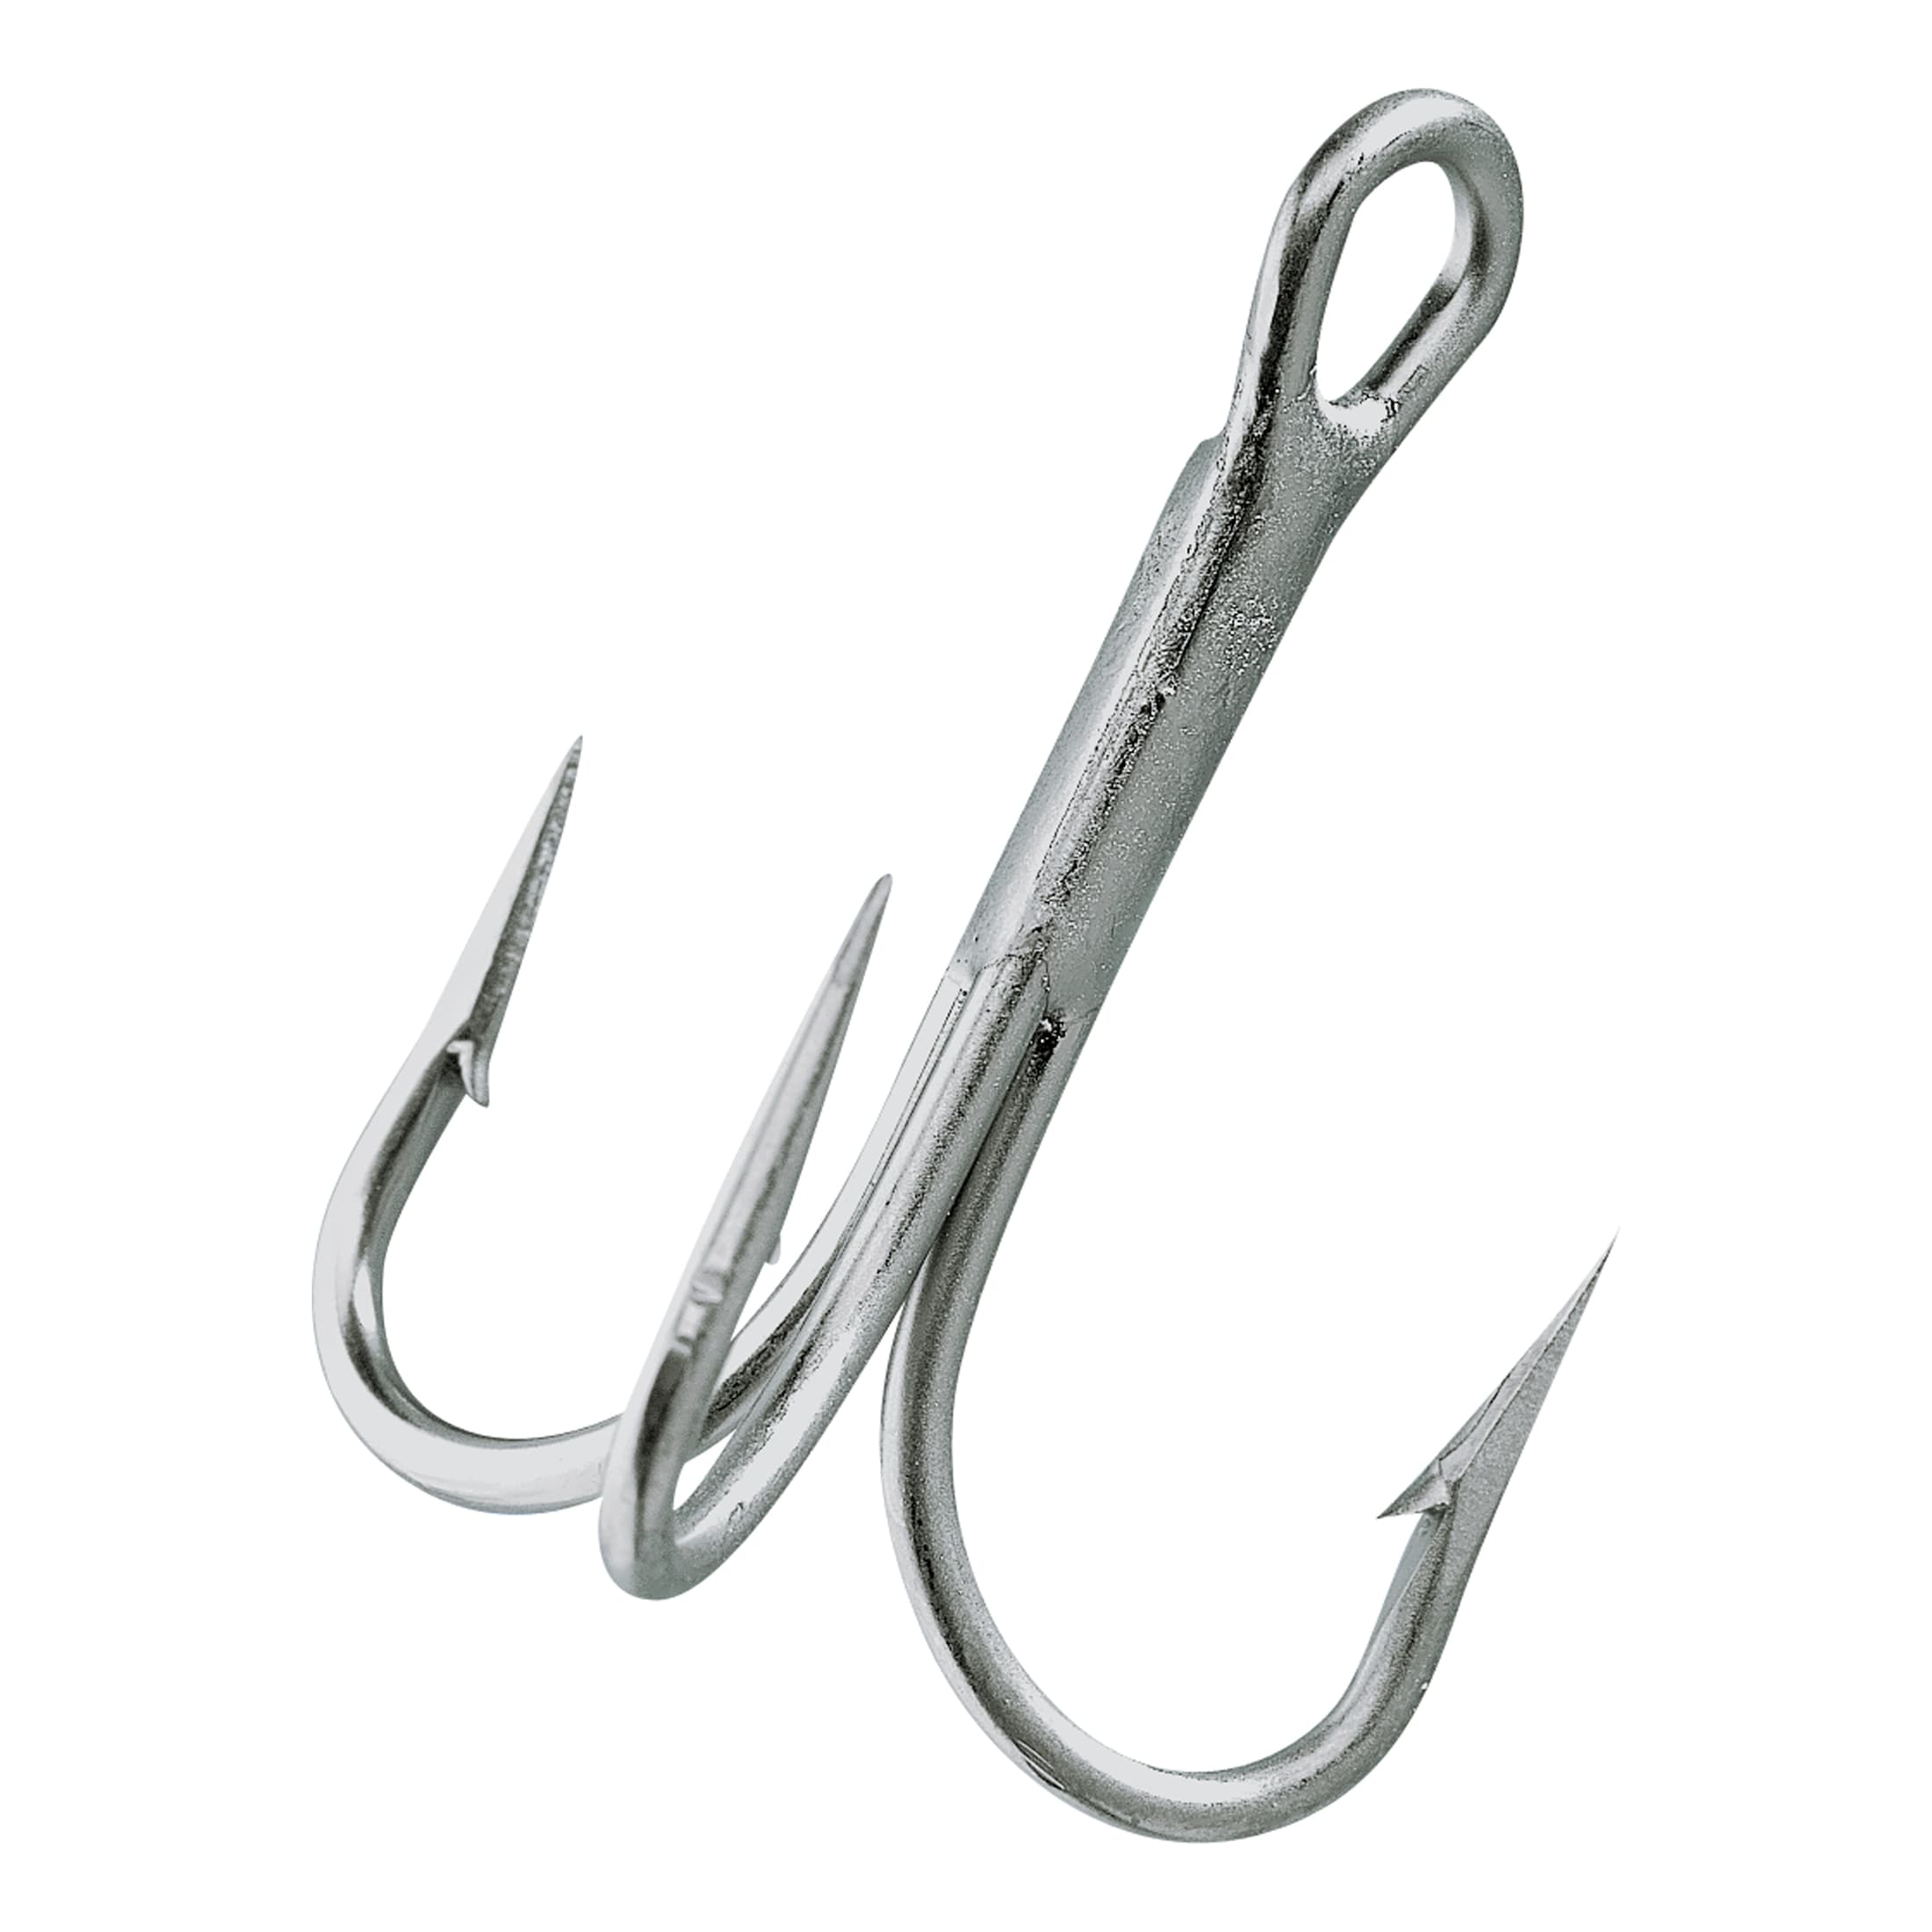 Eagle Claw Lazer Sharp L775 4x Strong Treble Hook - 5 Pack